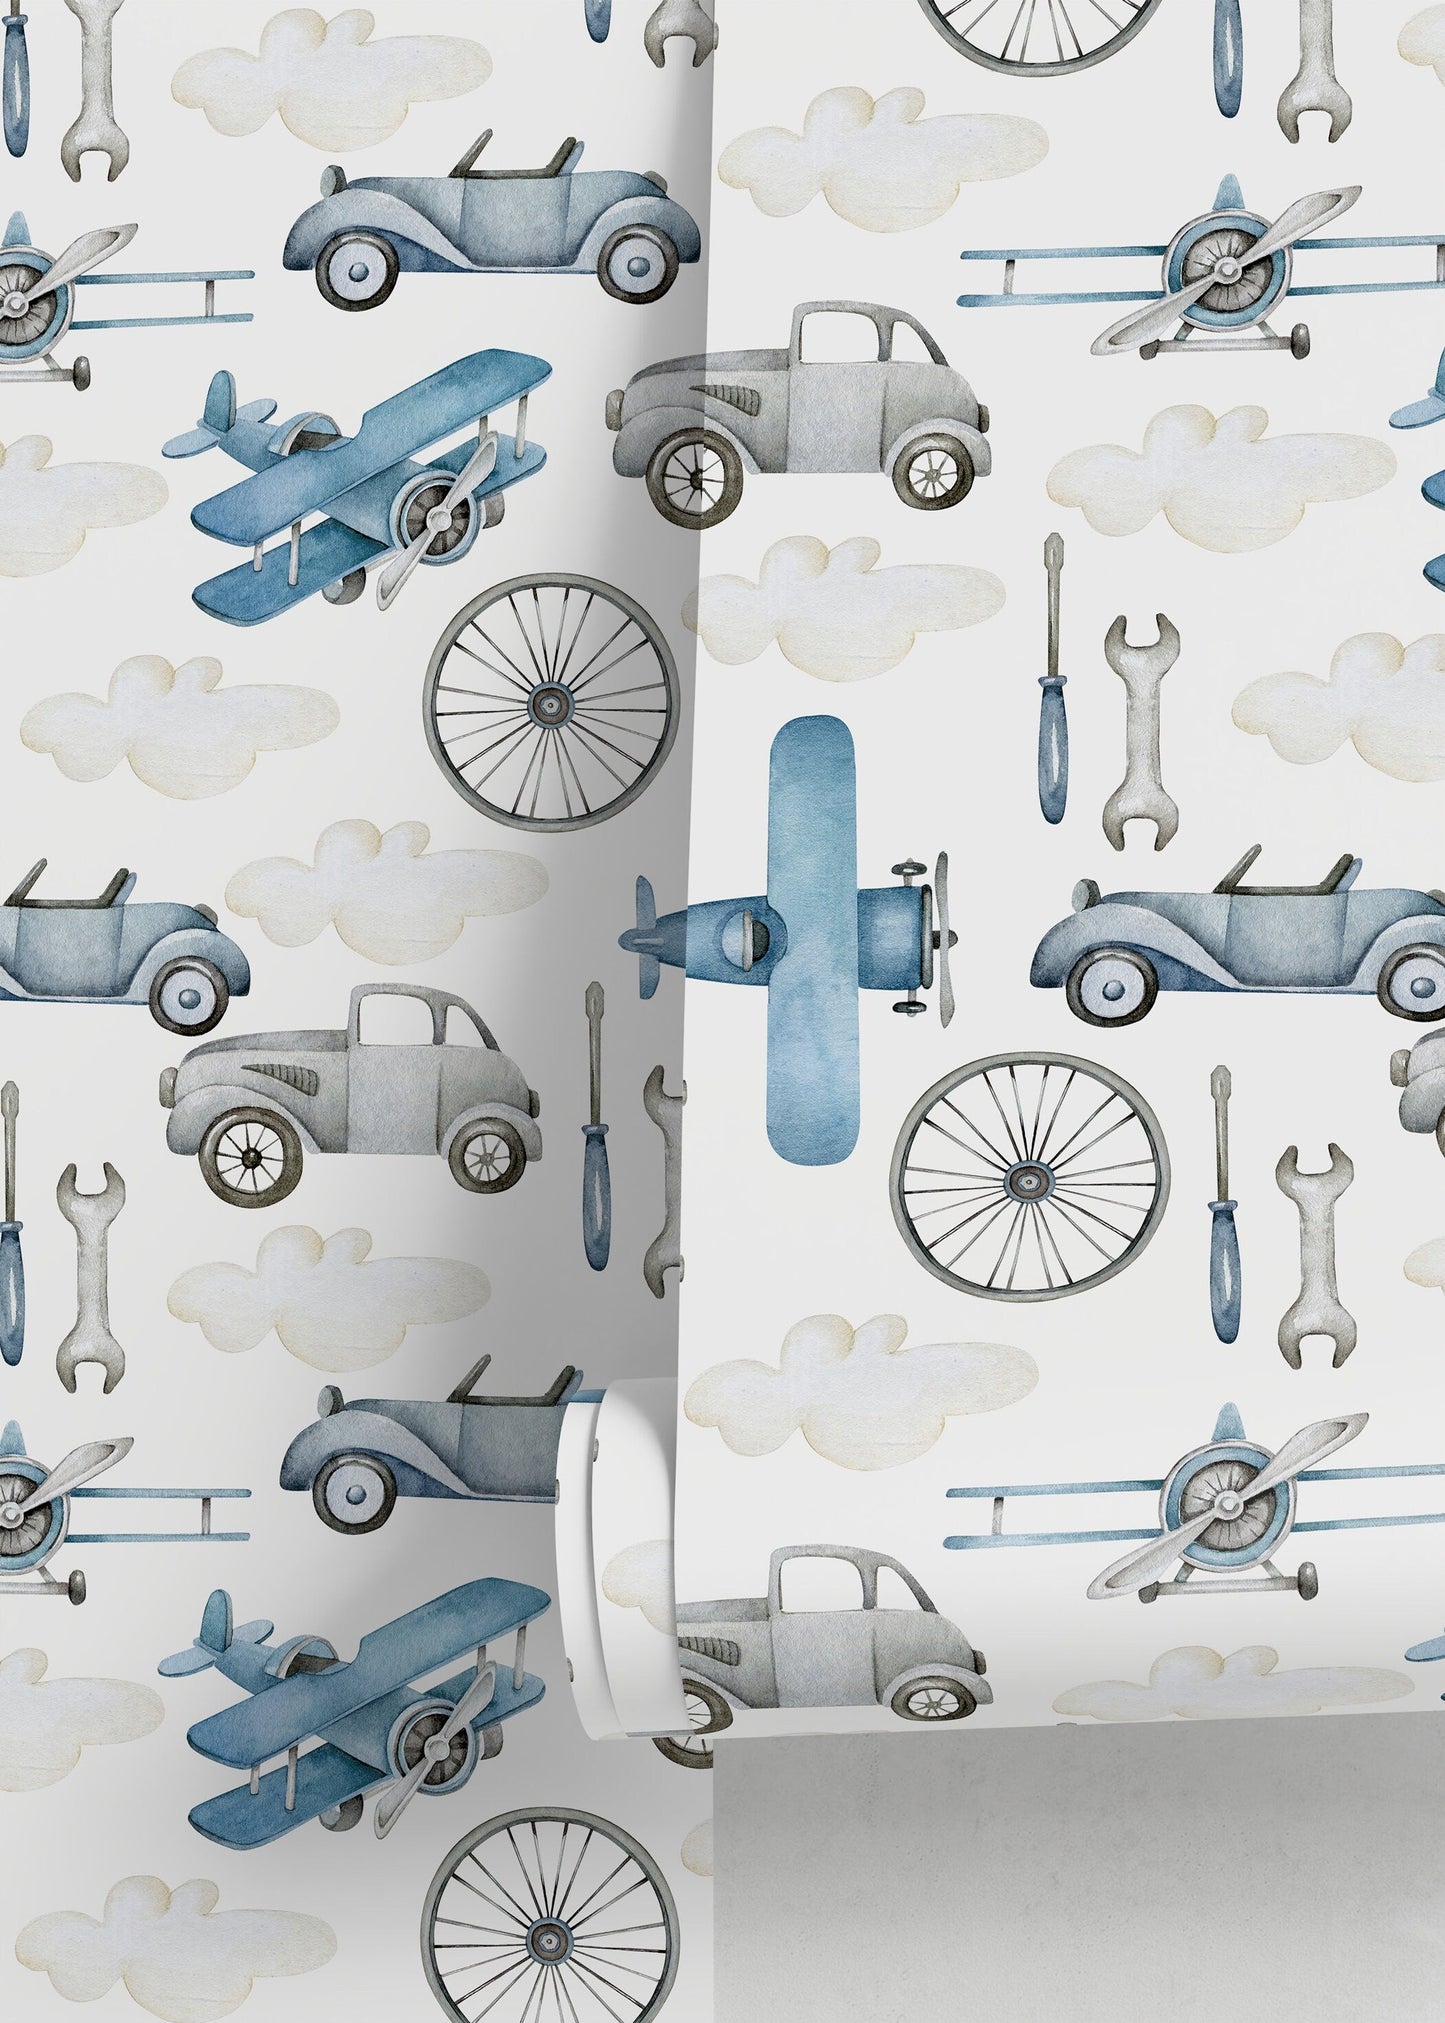 Airplanes and Cars Wallpaper / Peel and Stick Wallpaper Removable Wallpaper Home Decor Wall Art Wall Decor Room Decor - D527